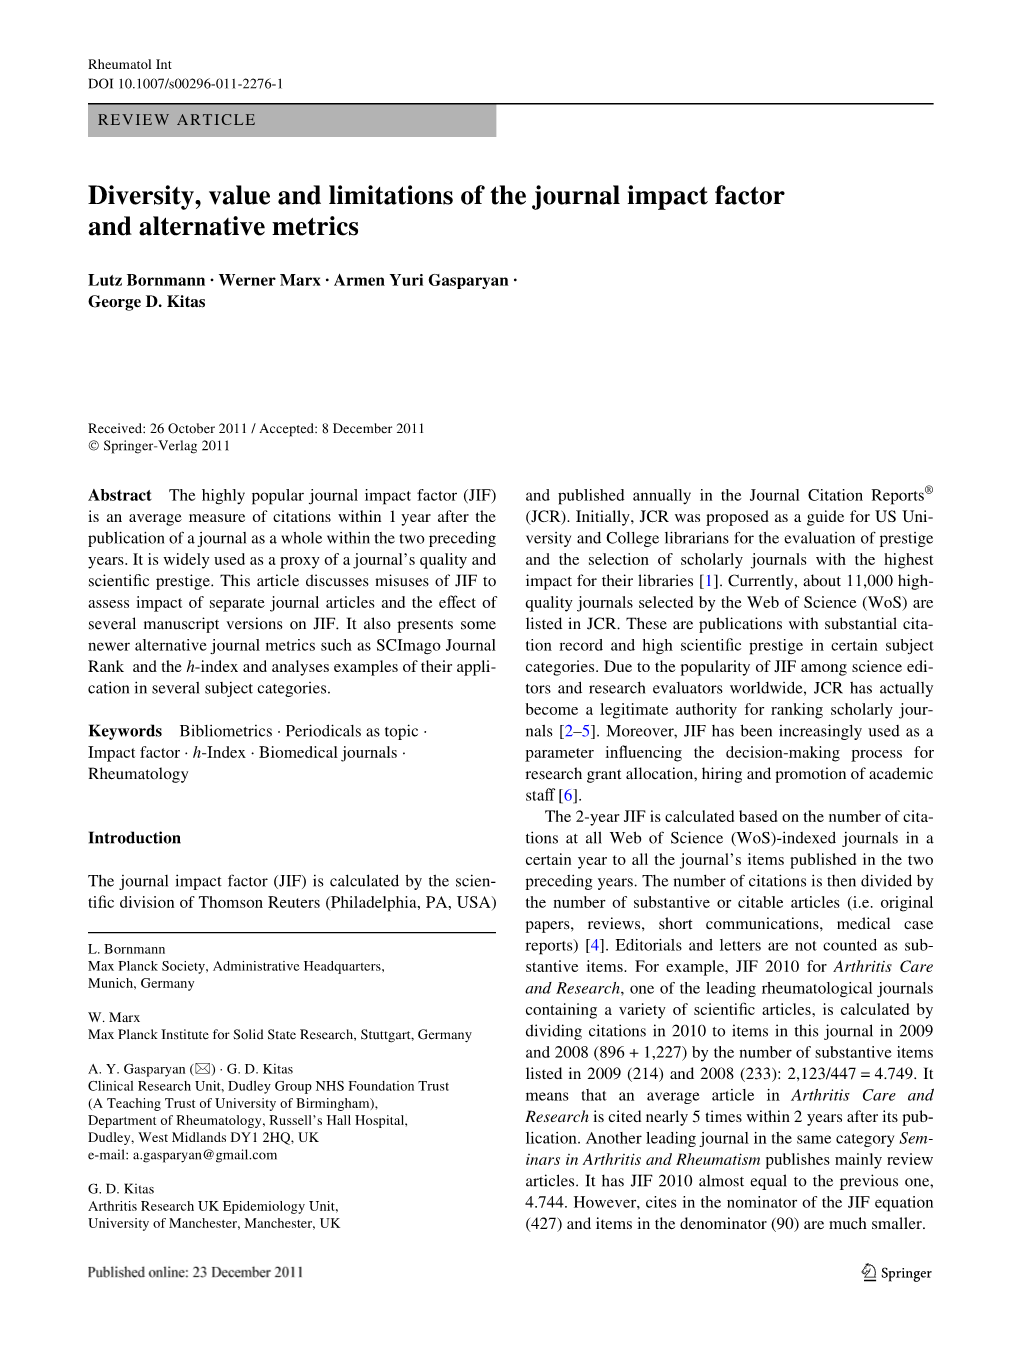 Diversity, Value and Limitations of the Journal Impact Factor and Alternative Metrics